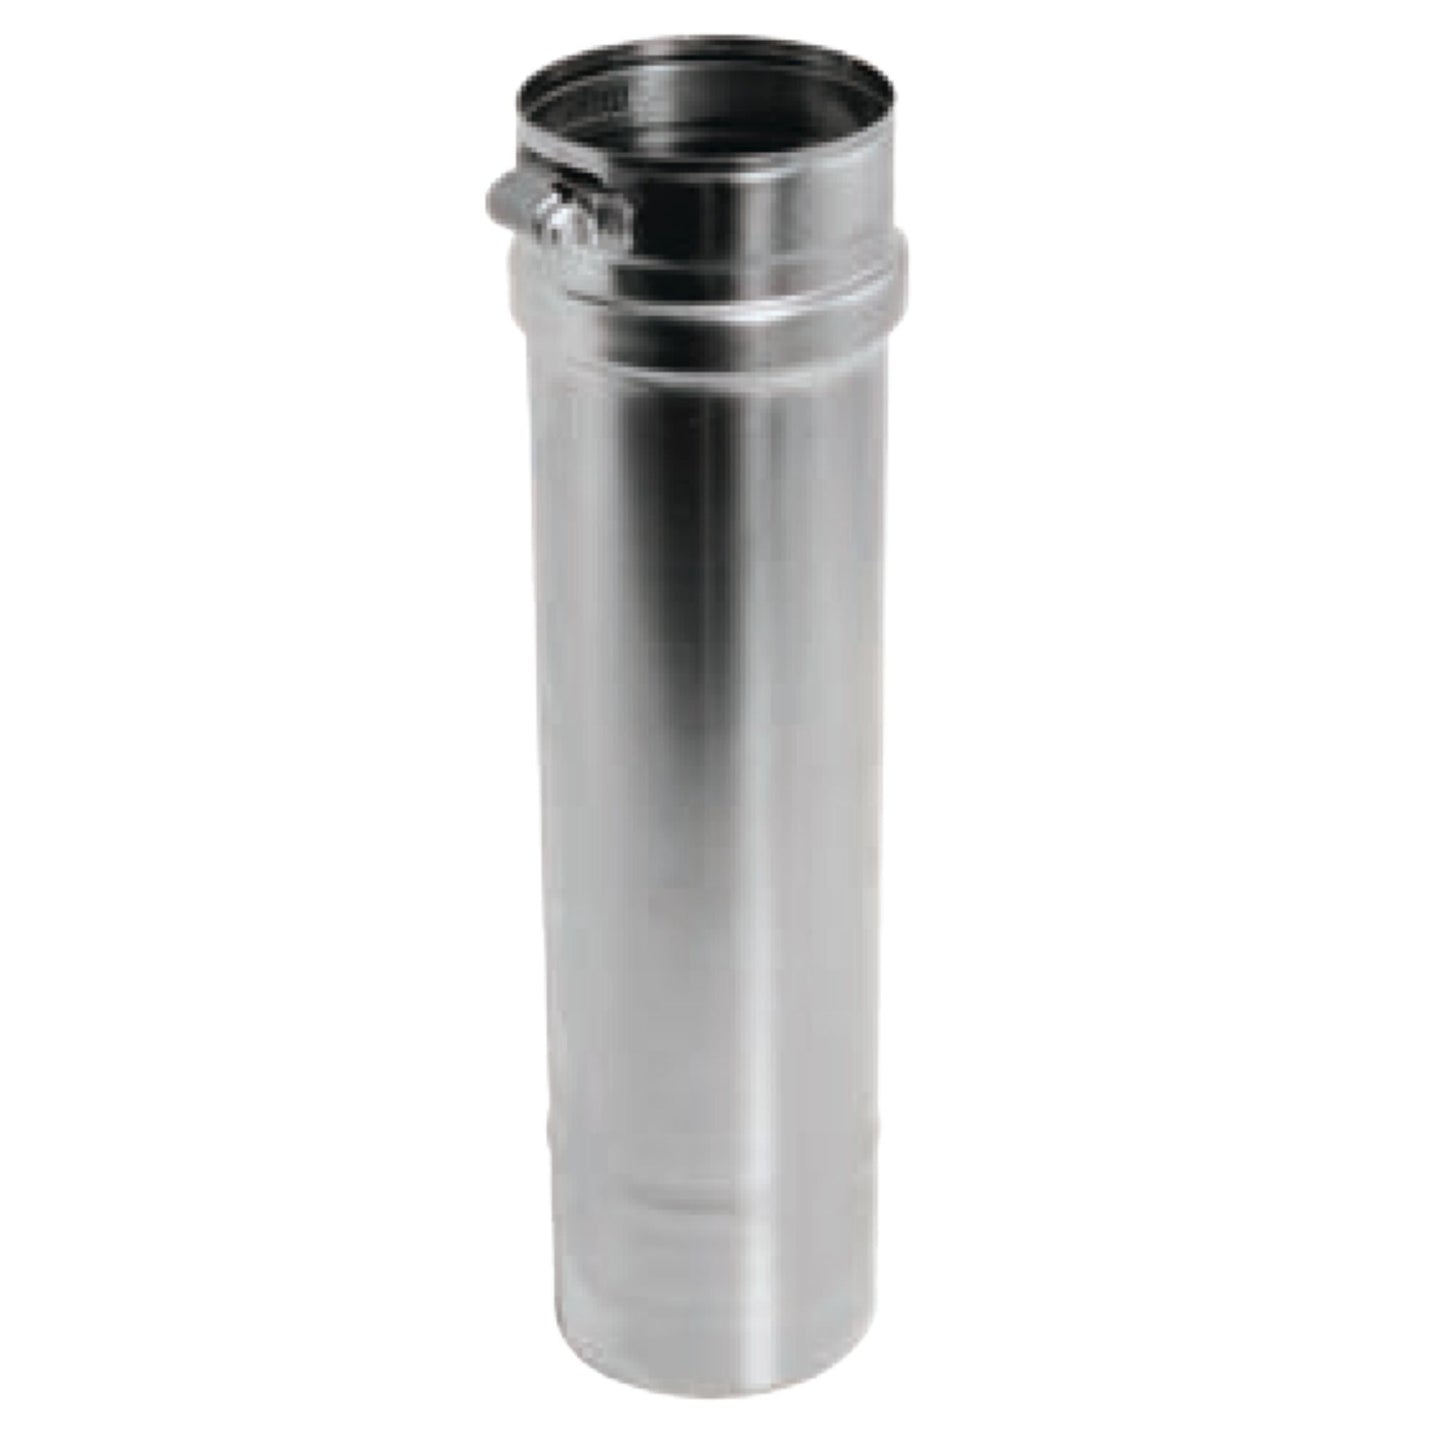 DuraVent FasNSeal 4" x 24" 29-4C Stainless Steel Vent Length